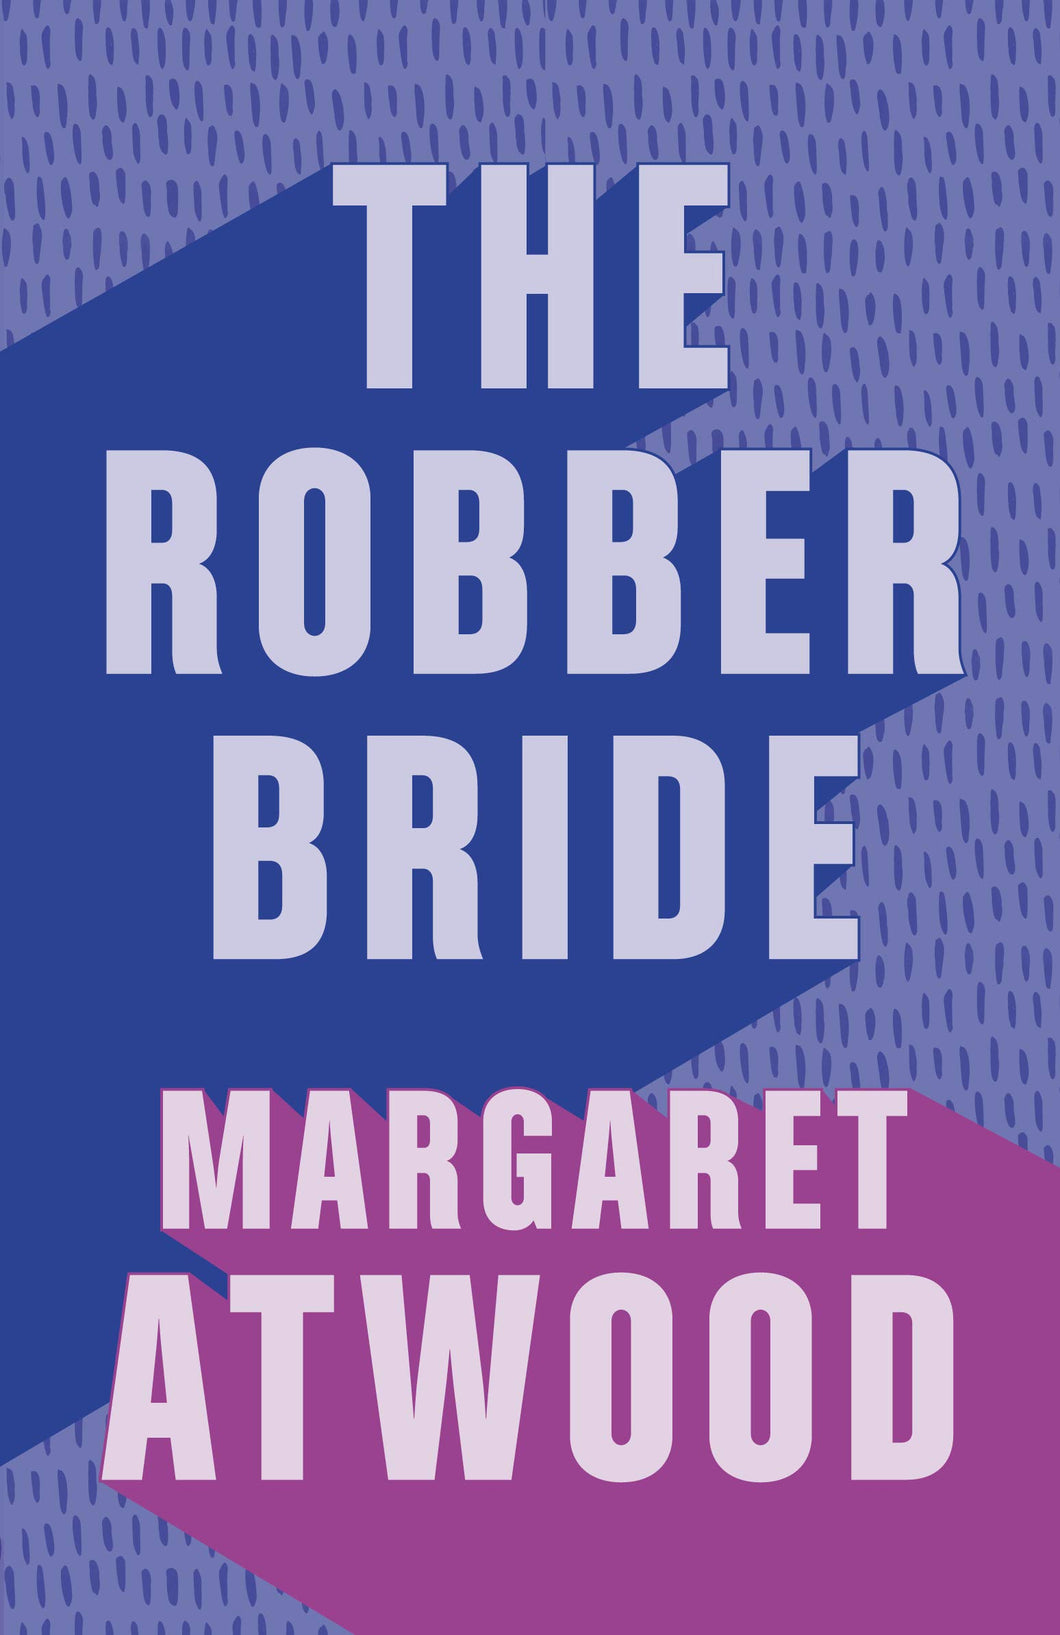 The Robber Bride [Margaret Atwood]